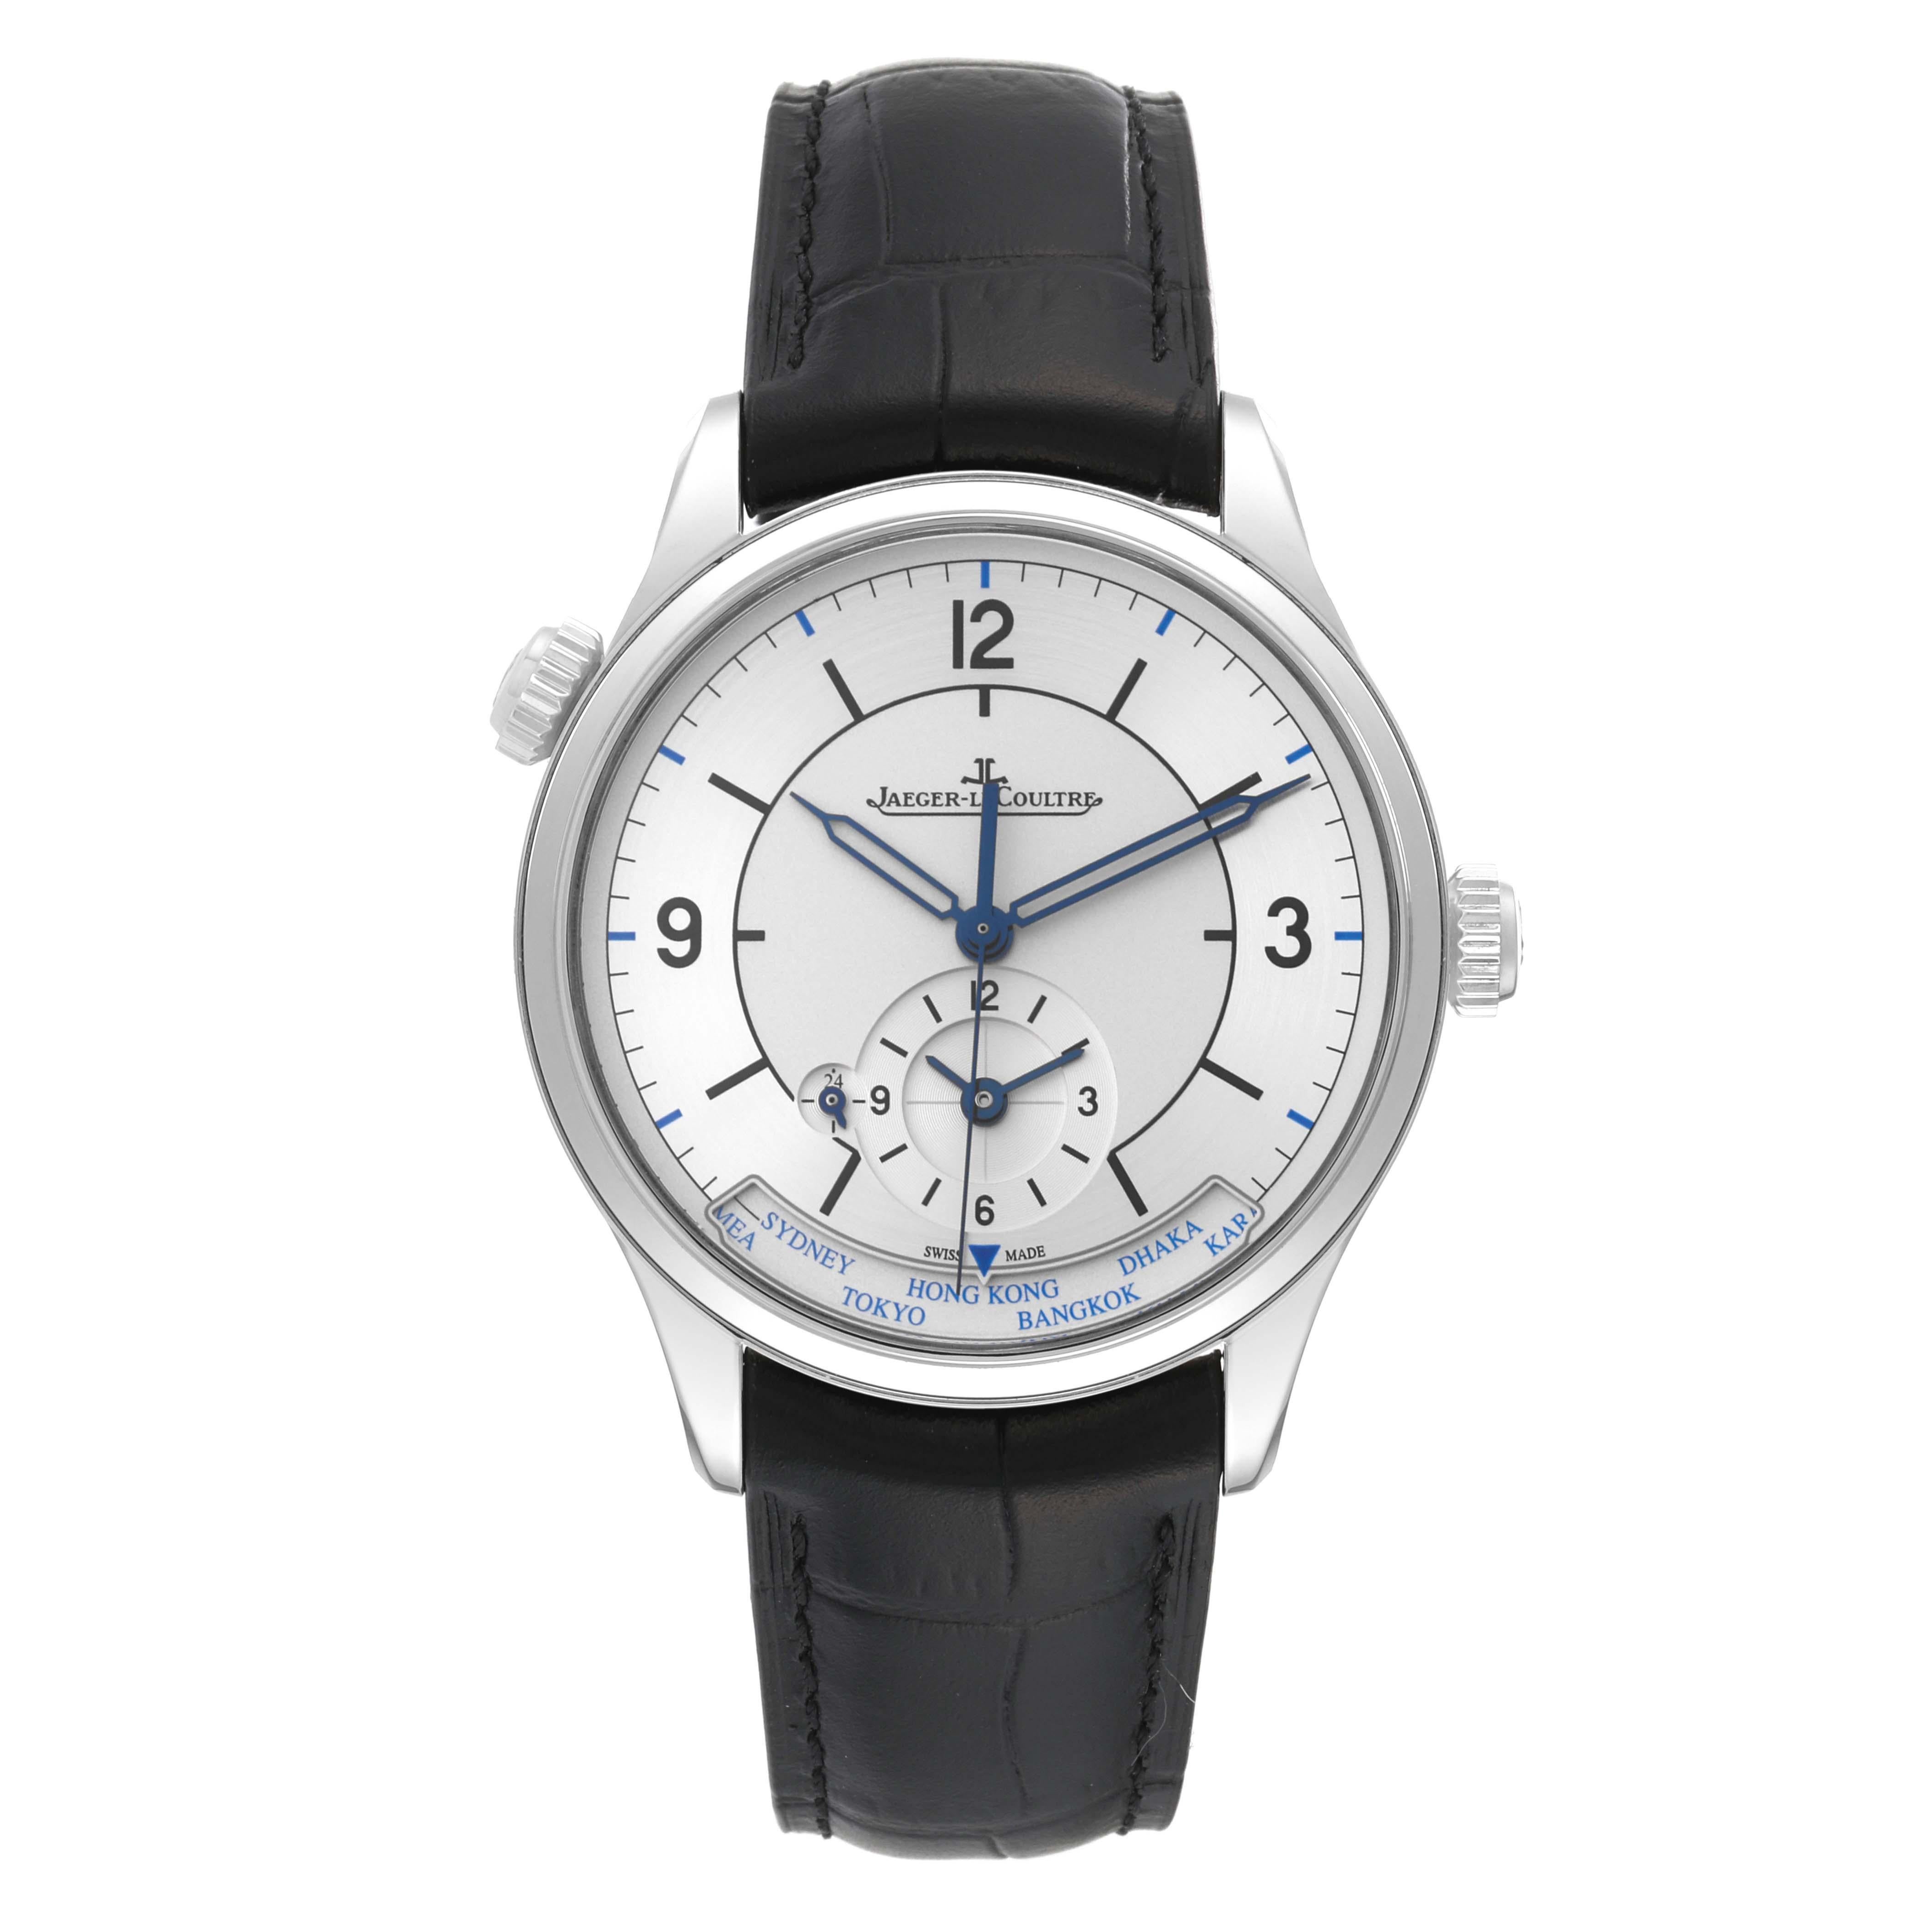 Jaeger LeCoultre Master Geographic Steel Mens Watch 176.8.92.S Q1428530. Self-winding automatic movement. Stainless steel case 39.0 mm in diameter. Switching between the 24 city locations is via the crown at the 10 o'clock position. Exhibition